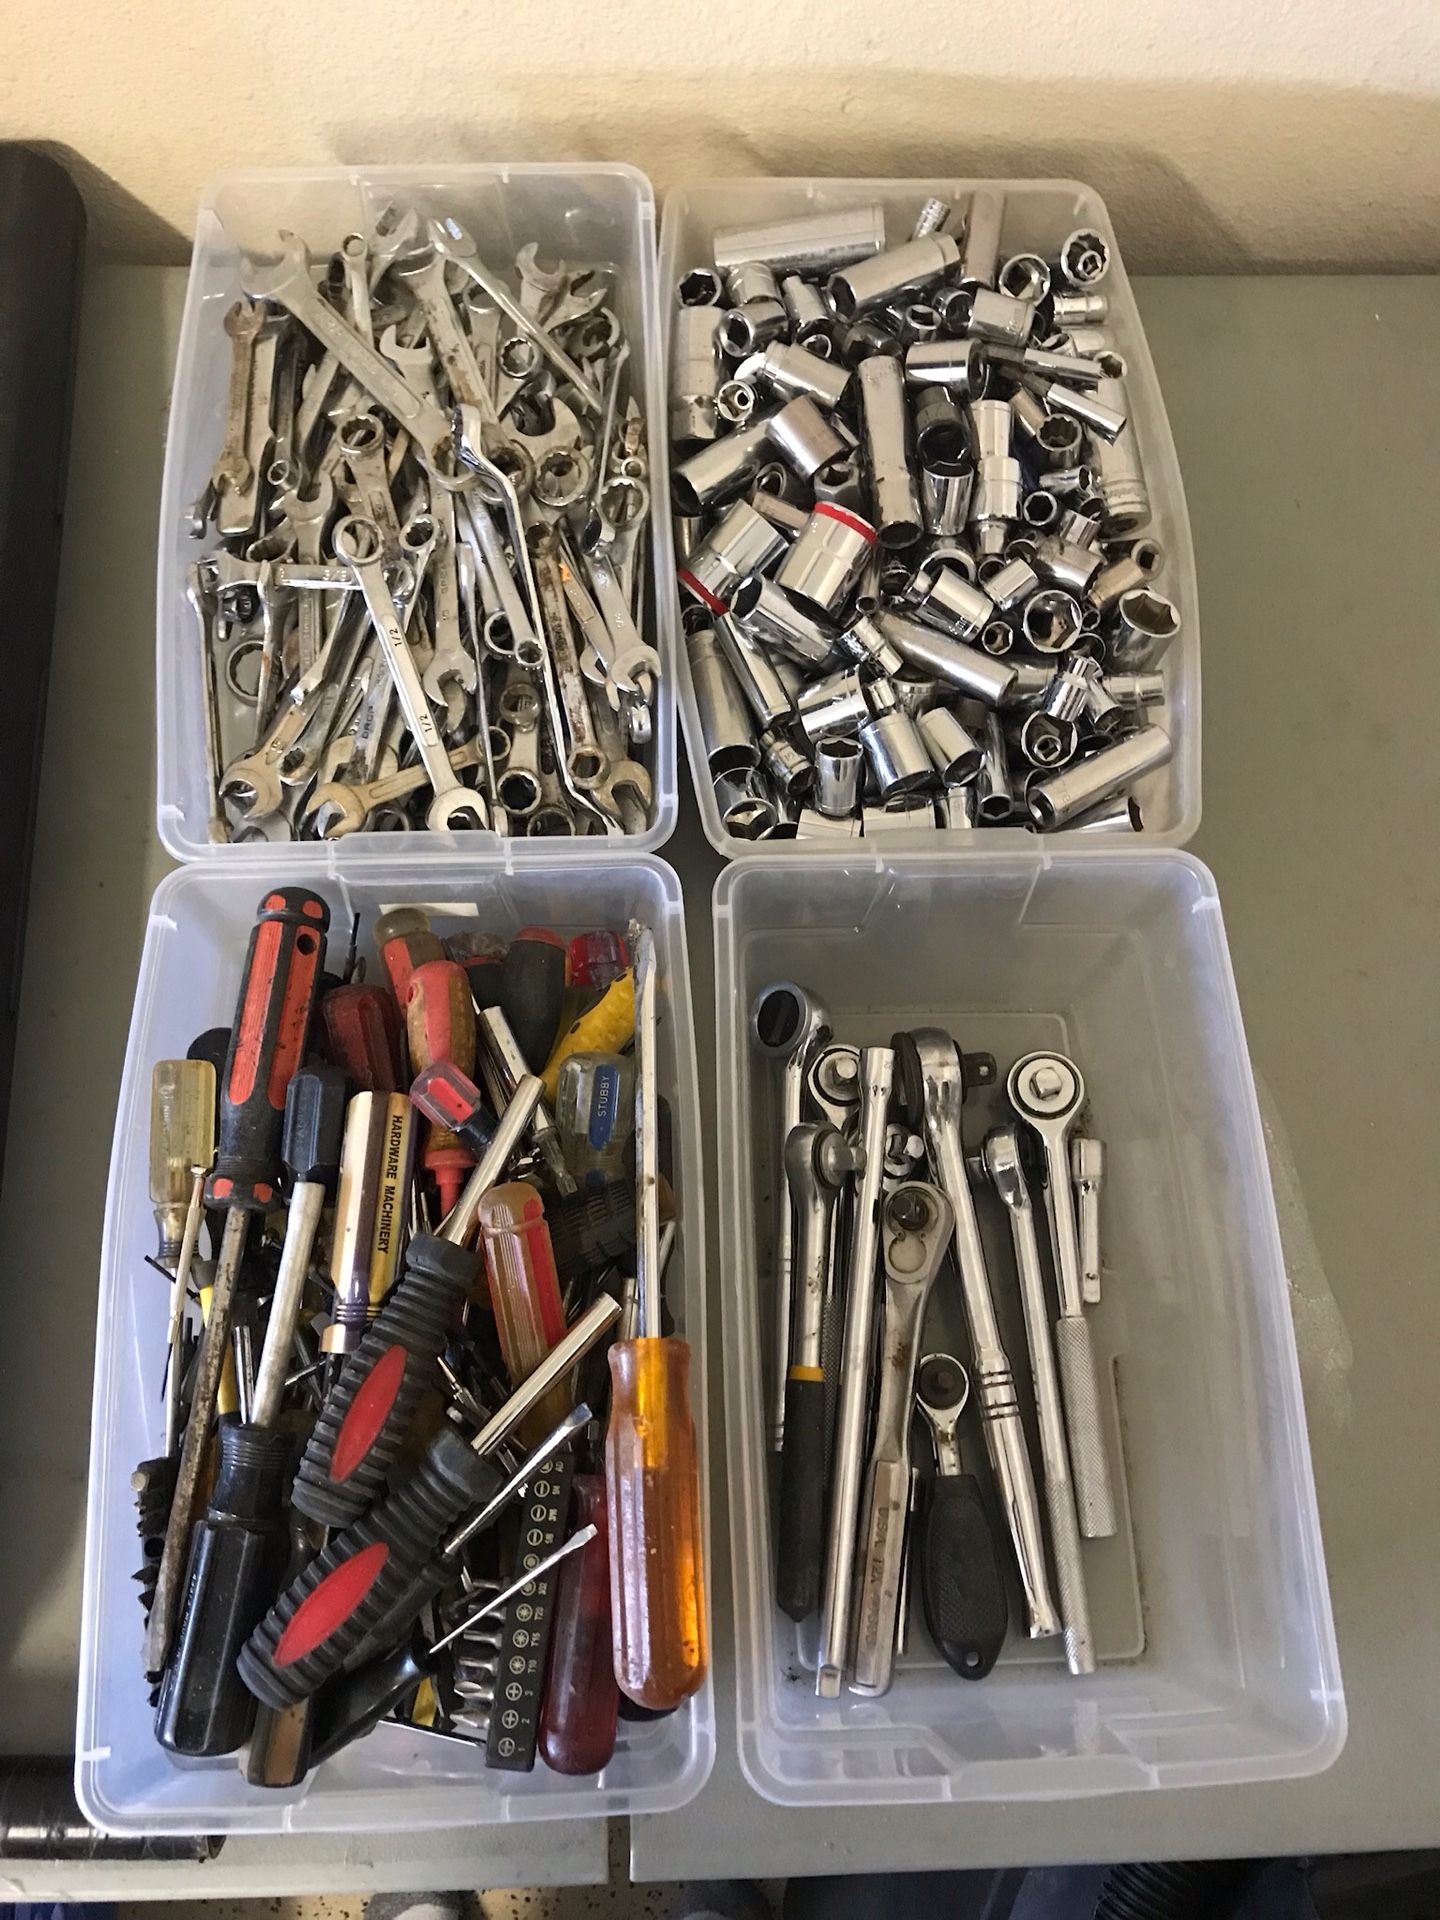 Assortment of Tools - Sockets, Wrenches, Screw Drivers - Sold As Lot Only